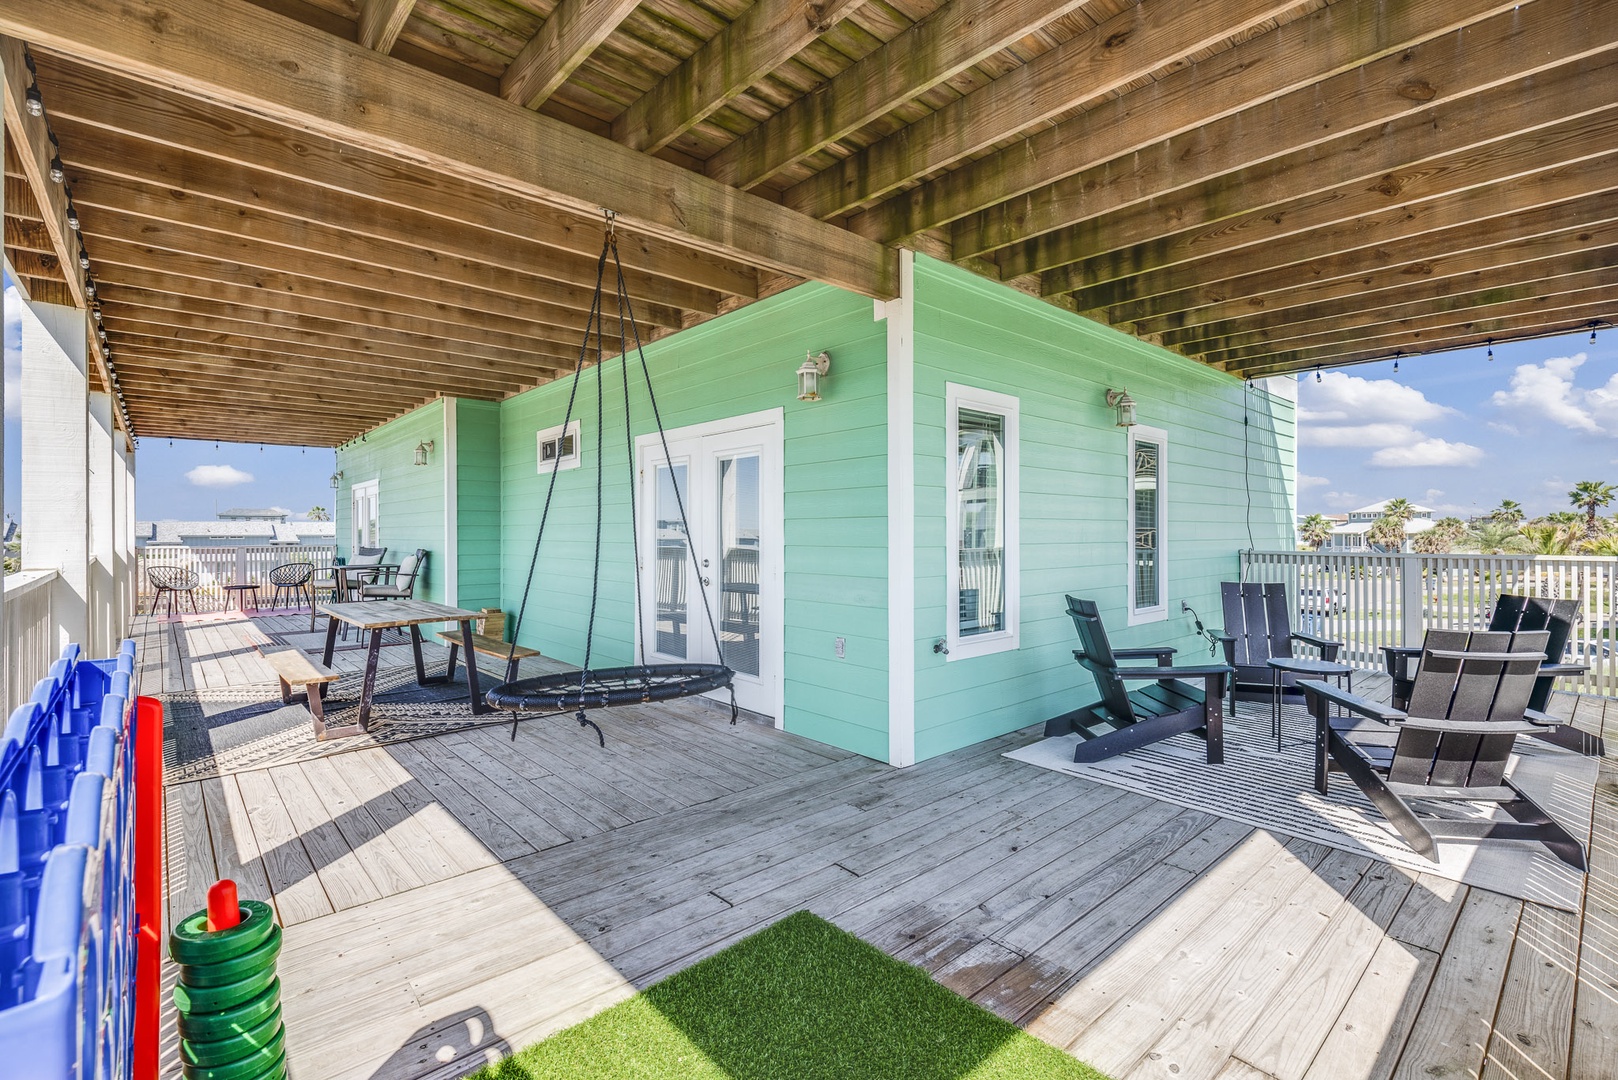 The 2nd Level Wraparound Deck is a perfect retreat, with space to lounge and play